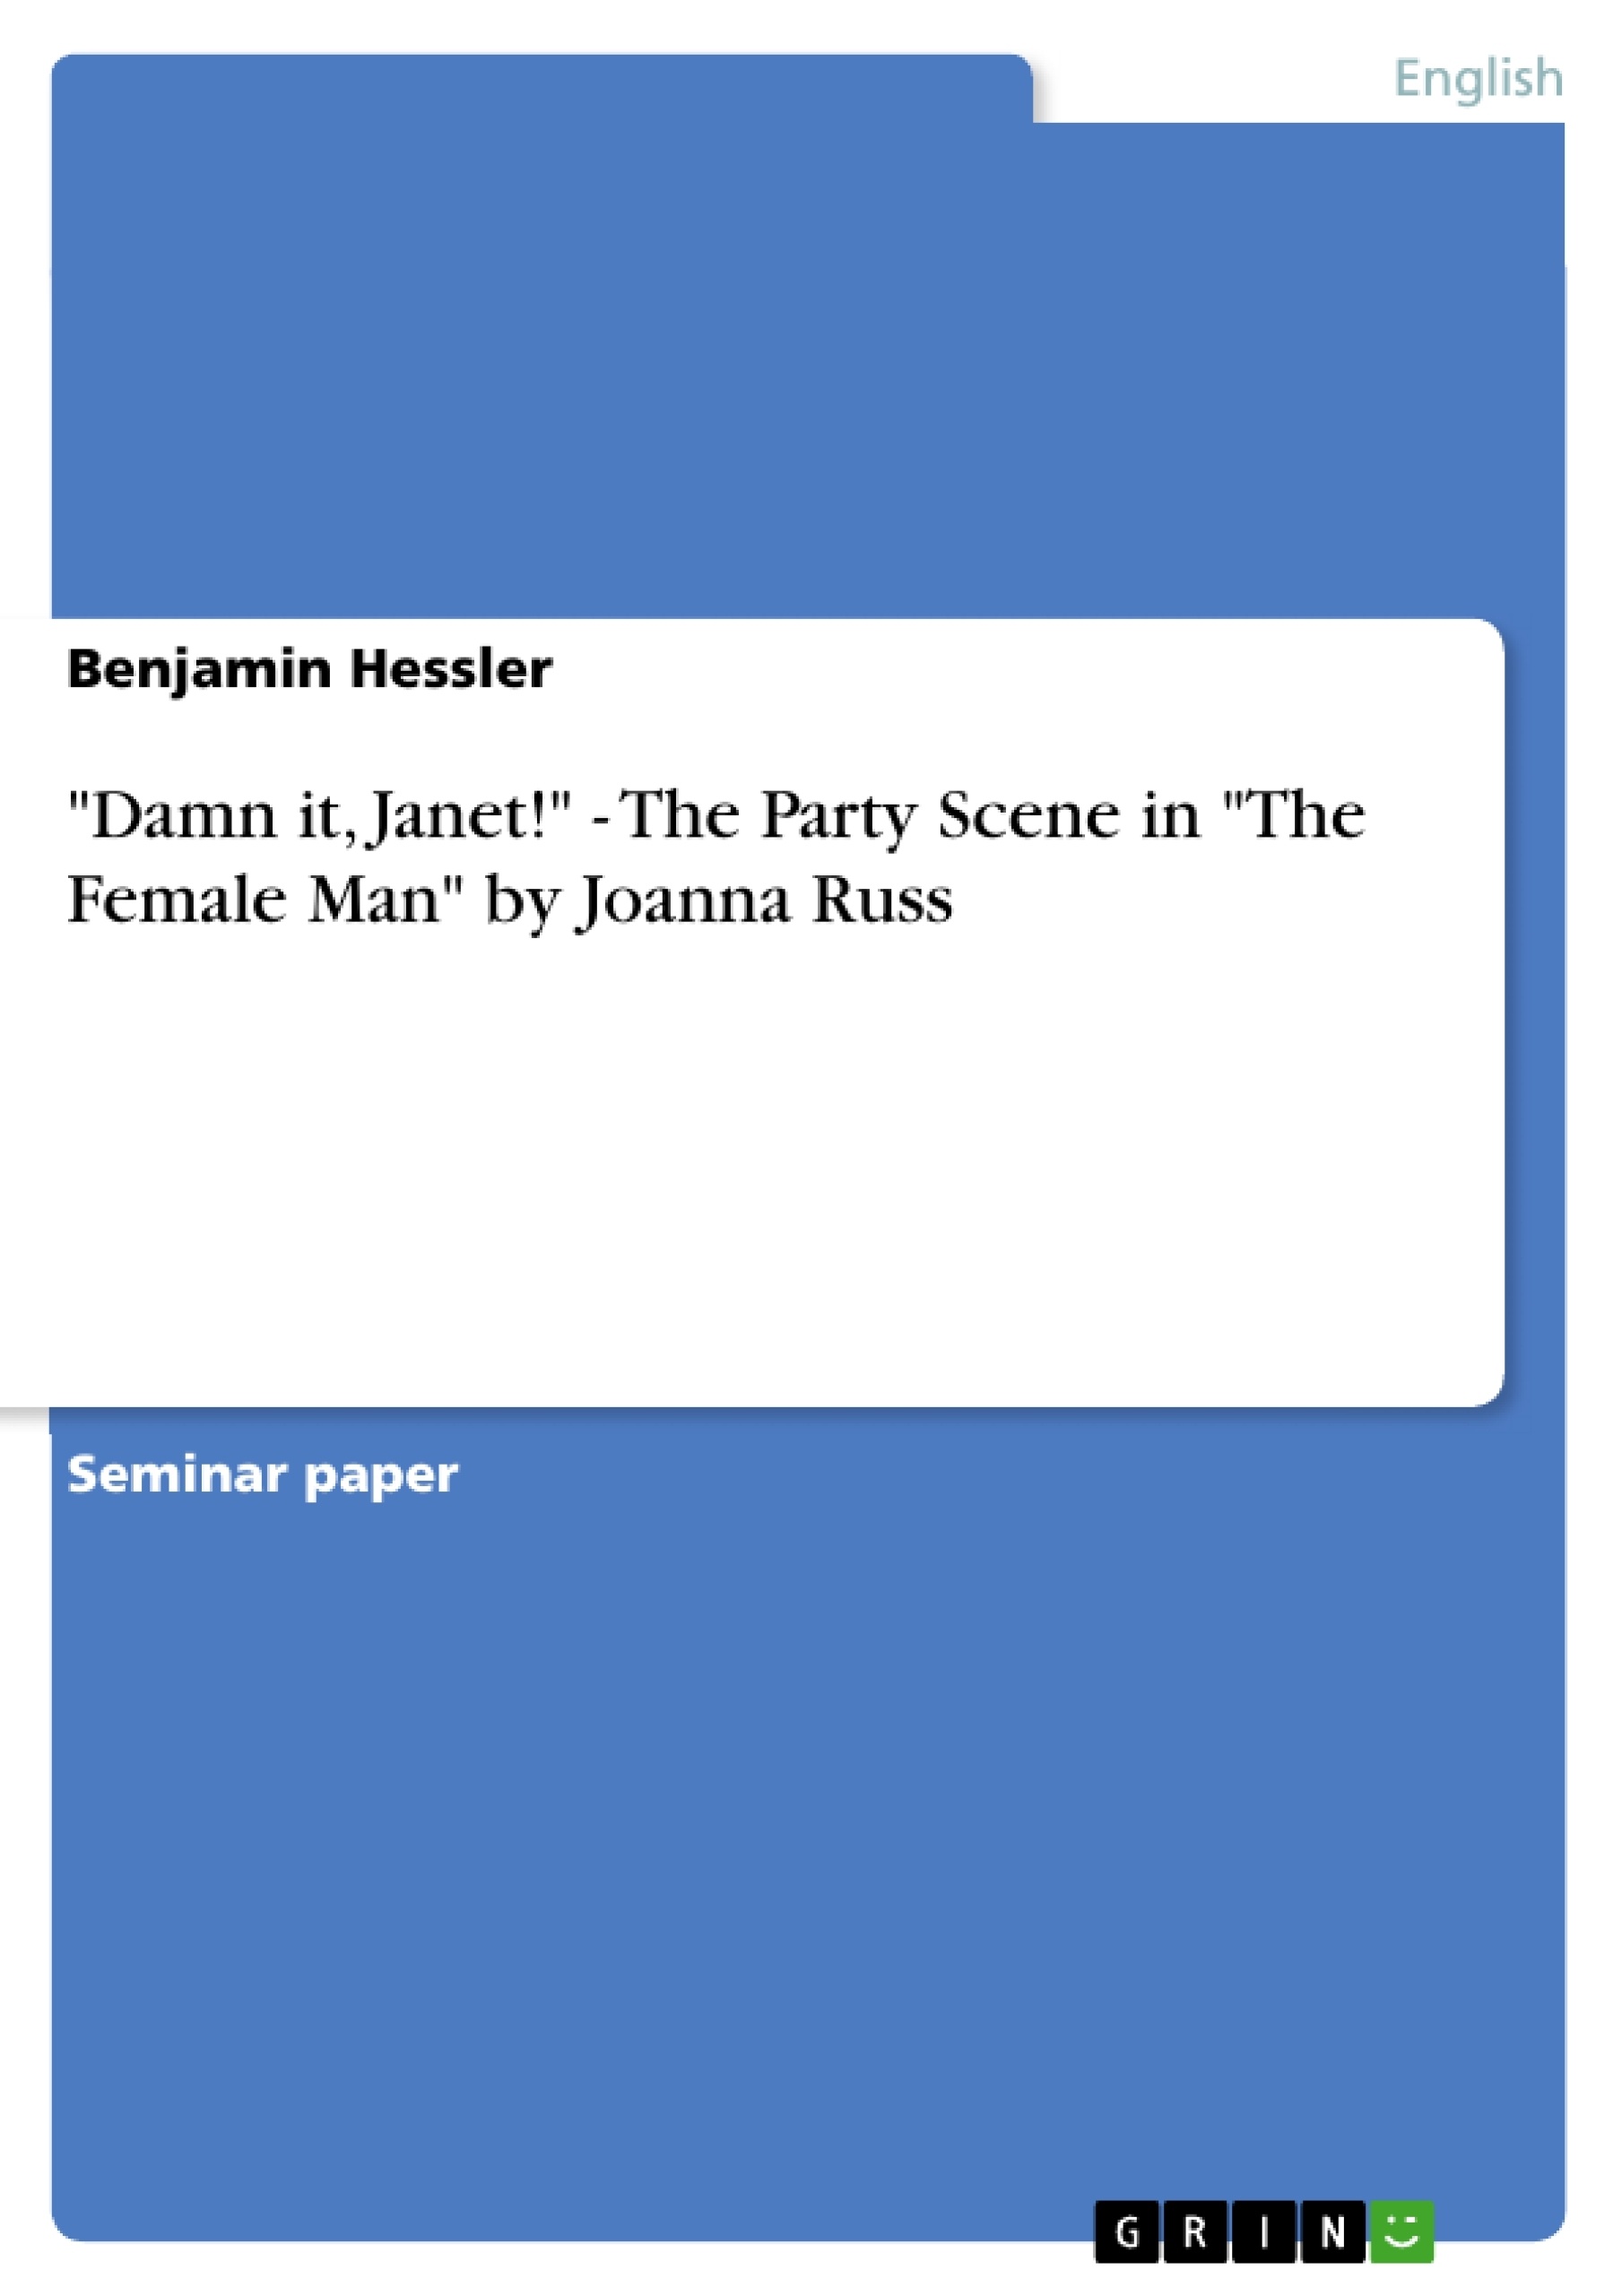 Title: "Damn it, Janet!" - The Party Scene in "The Female Man" by Joanna Russ